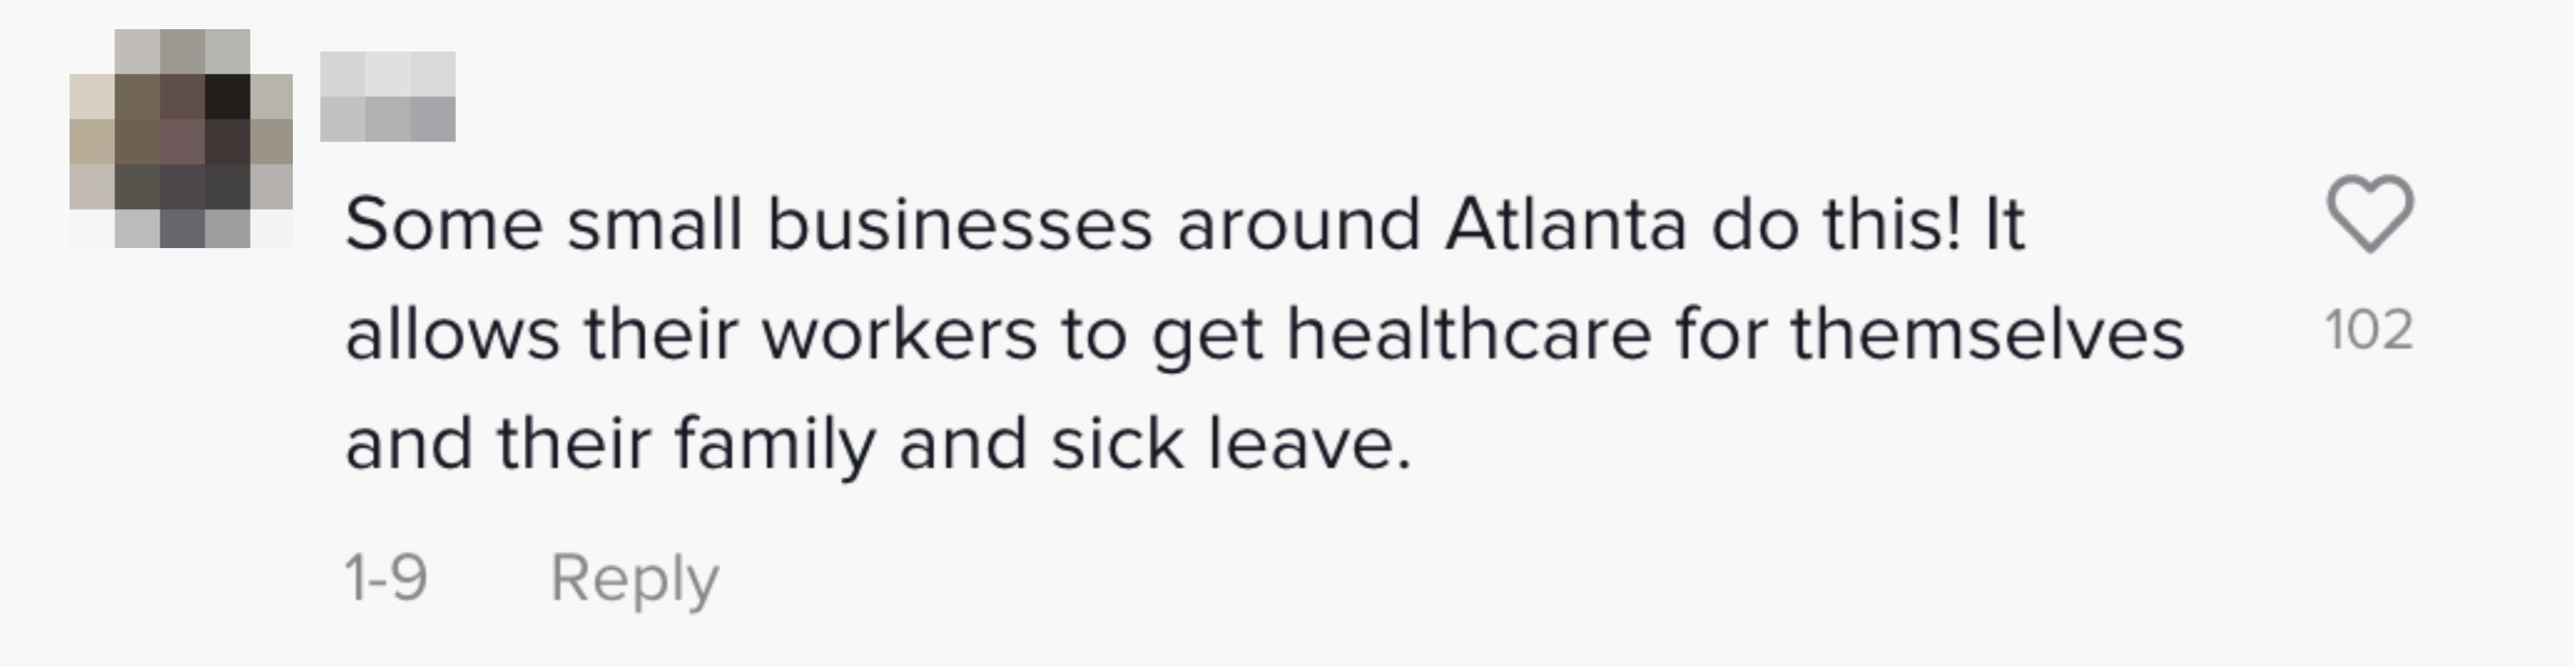 Some small businesses in Atlanta do this; it allows their workers to get healthcare for themselves and their family and sick leave